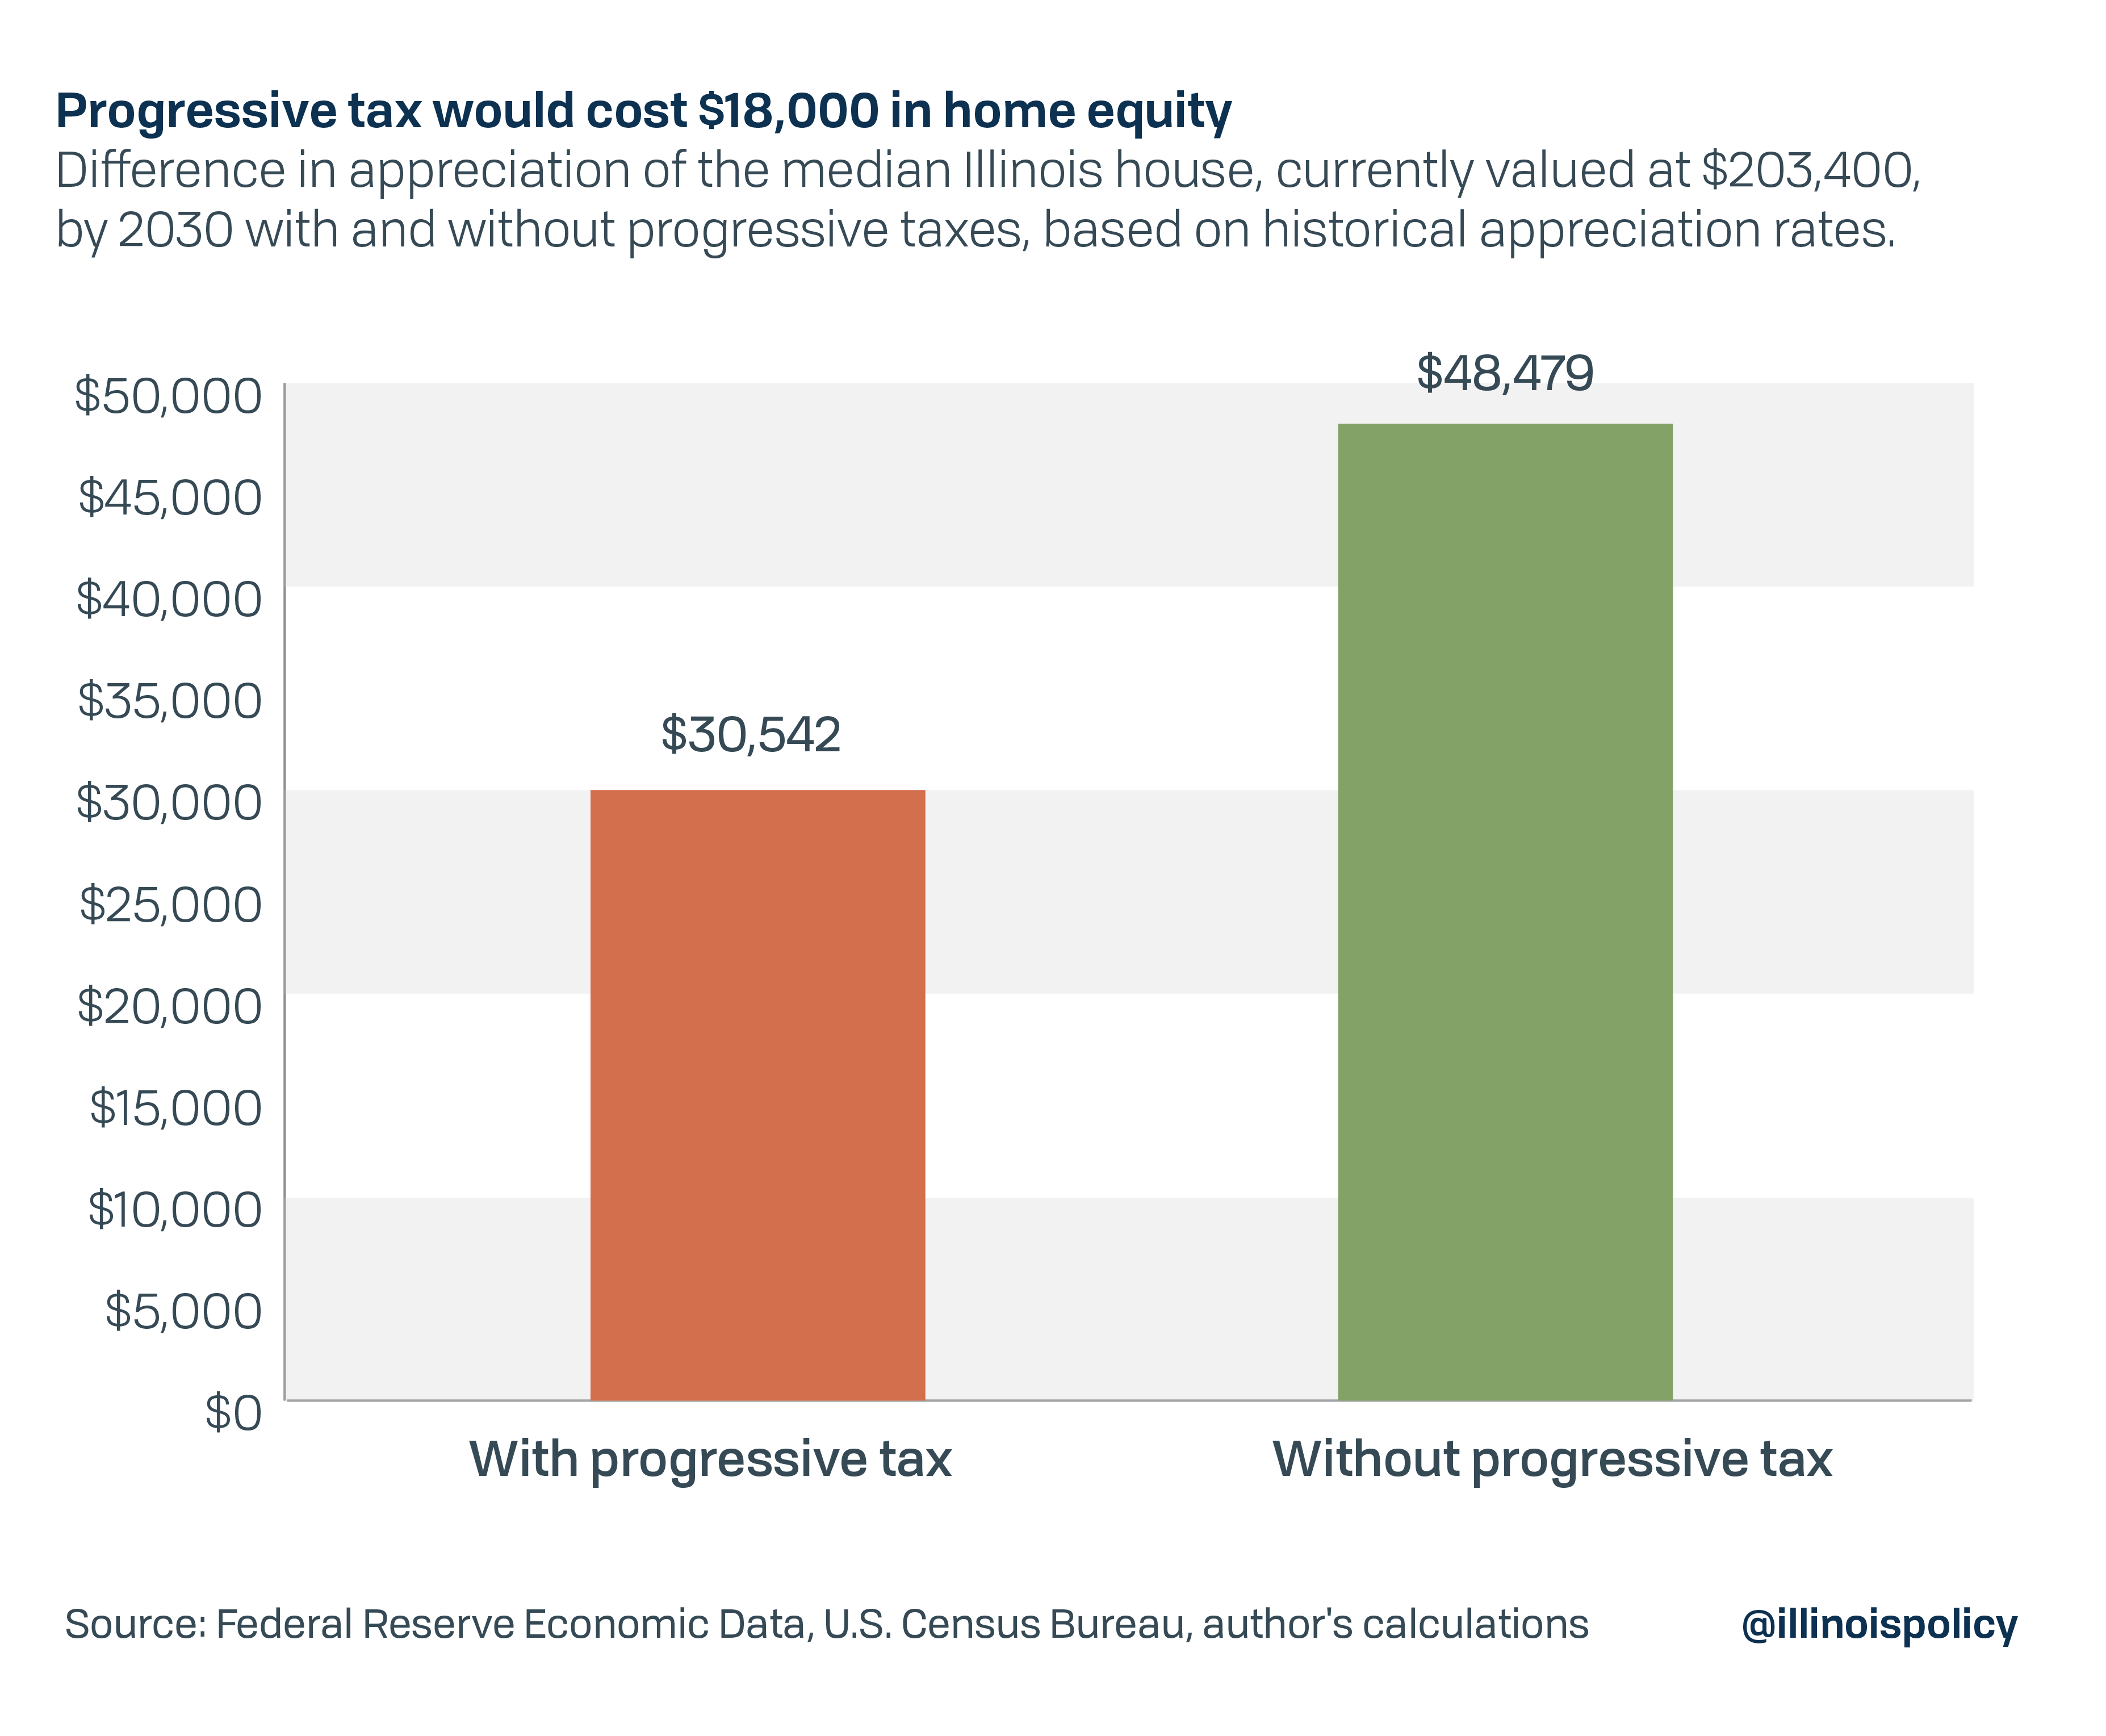 Progressive tax would cost $18,000 in home equity